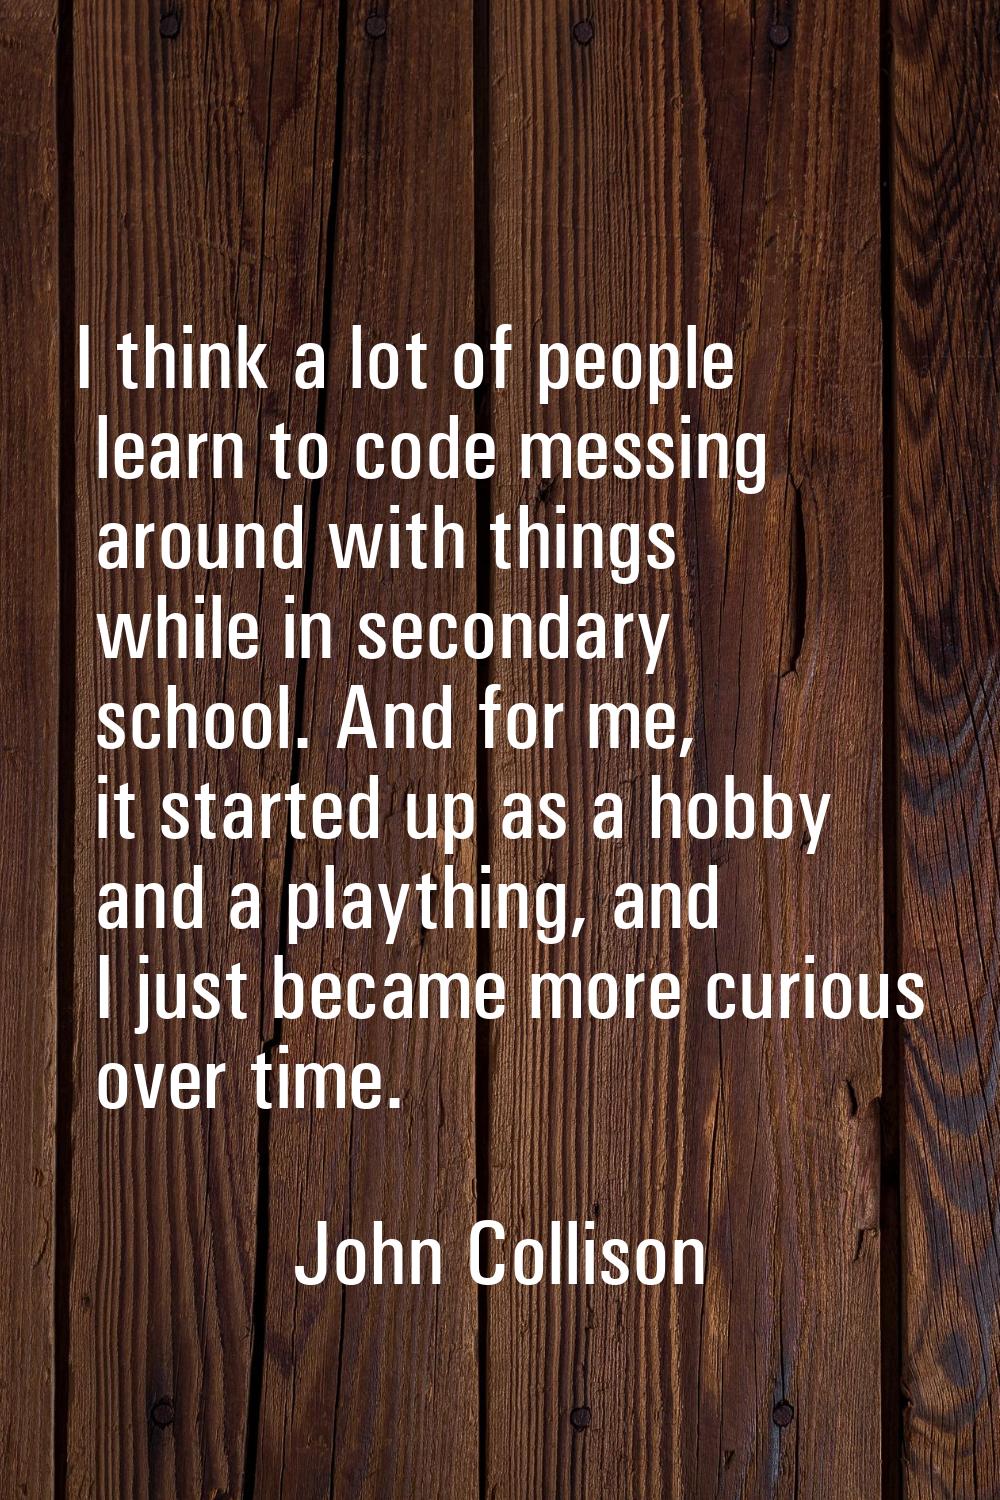 I think a lot of people learn to code messing around with things while in secondary school. And for